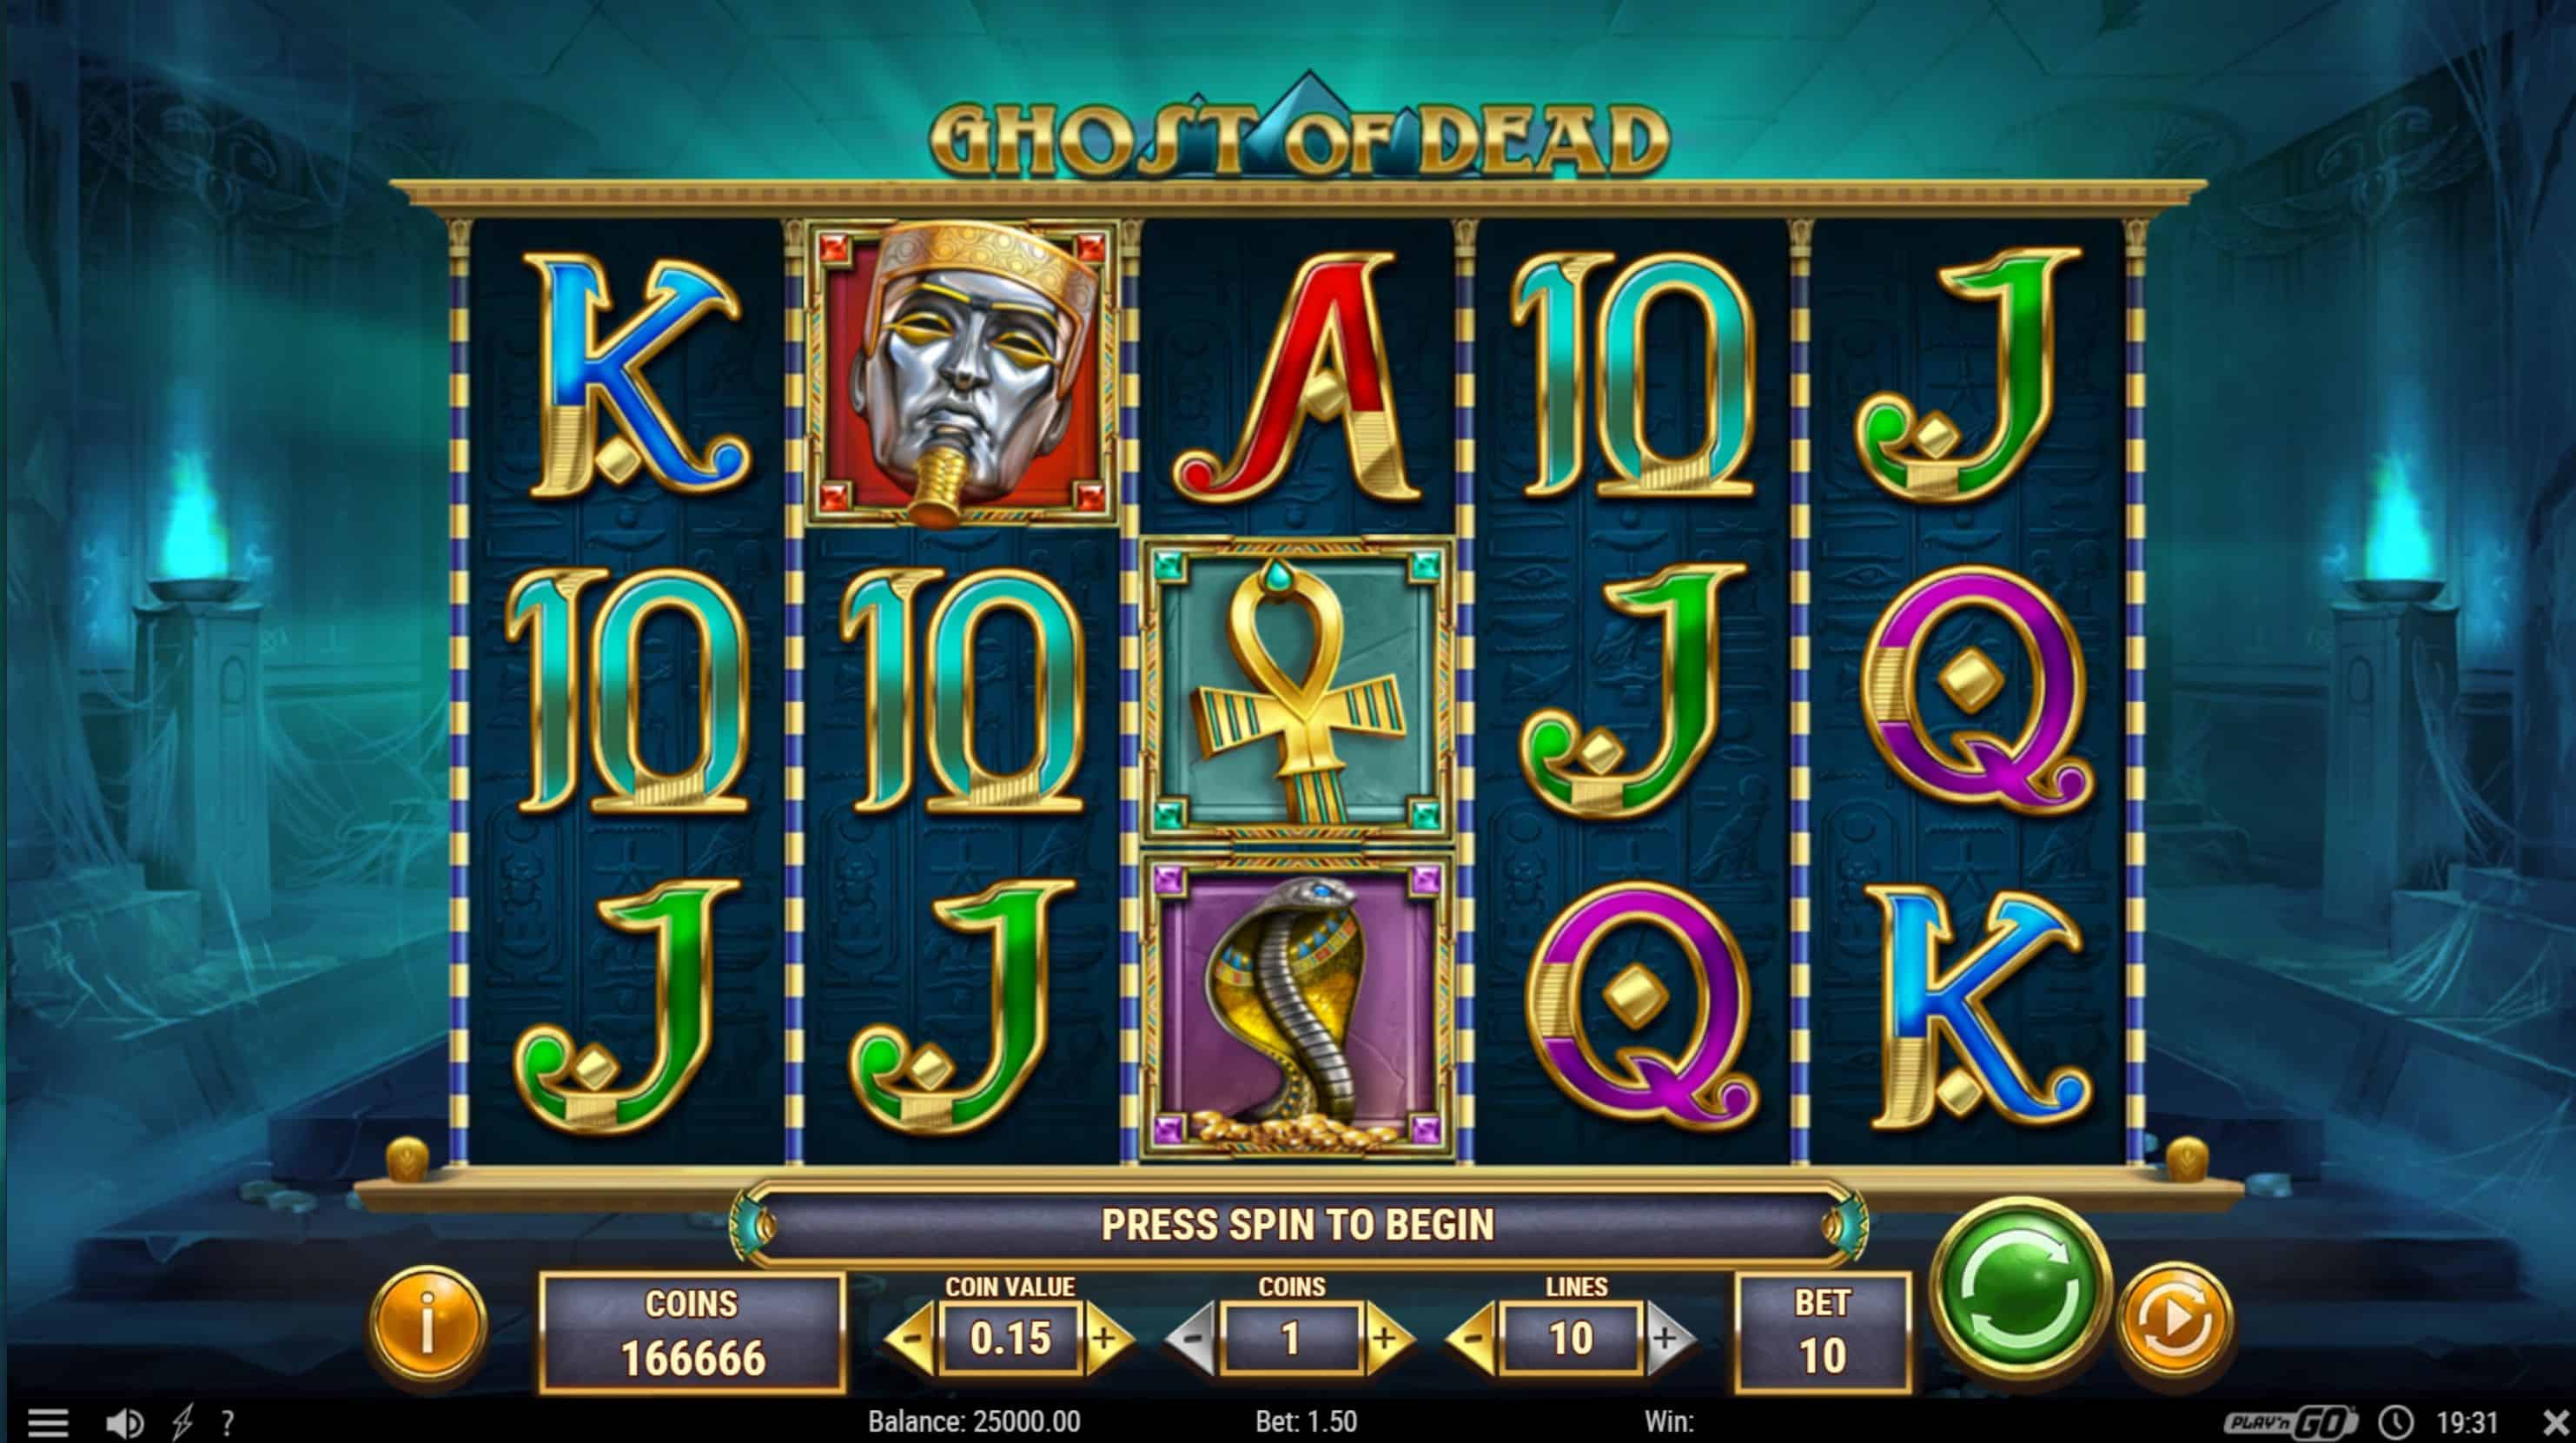 Ghost of Dead Slot Game Free Play at Casino Ireland 01